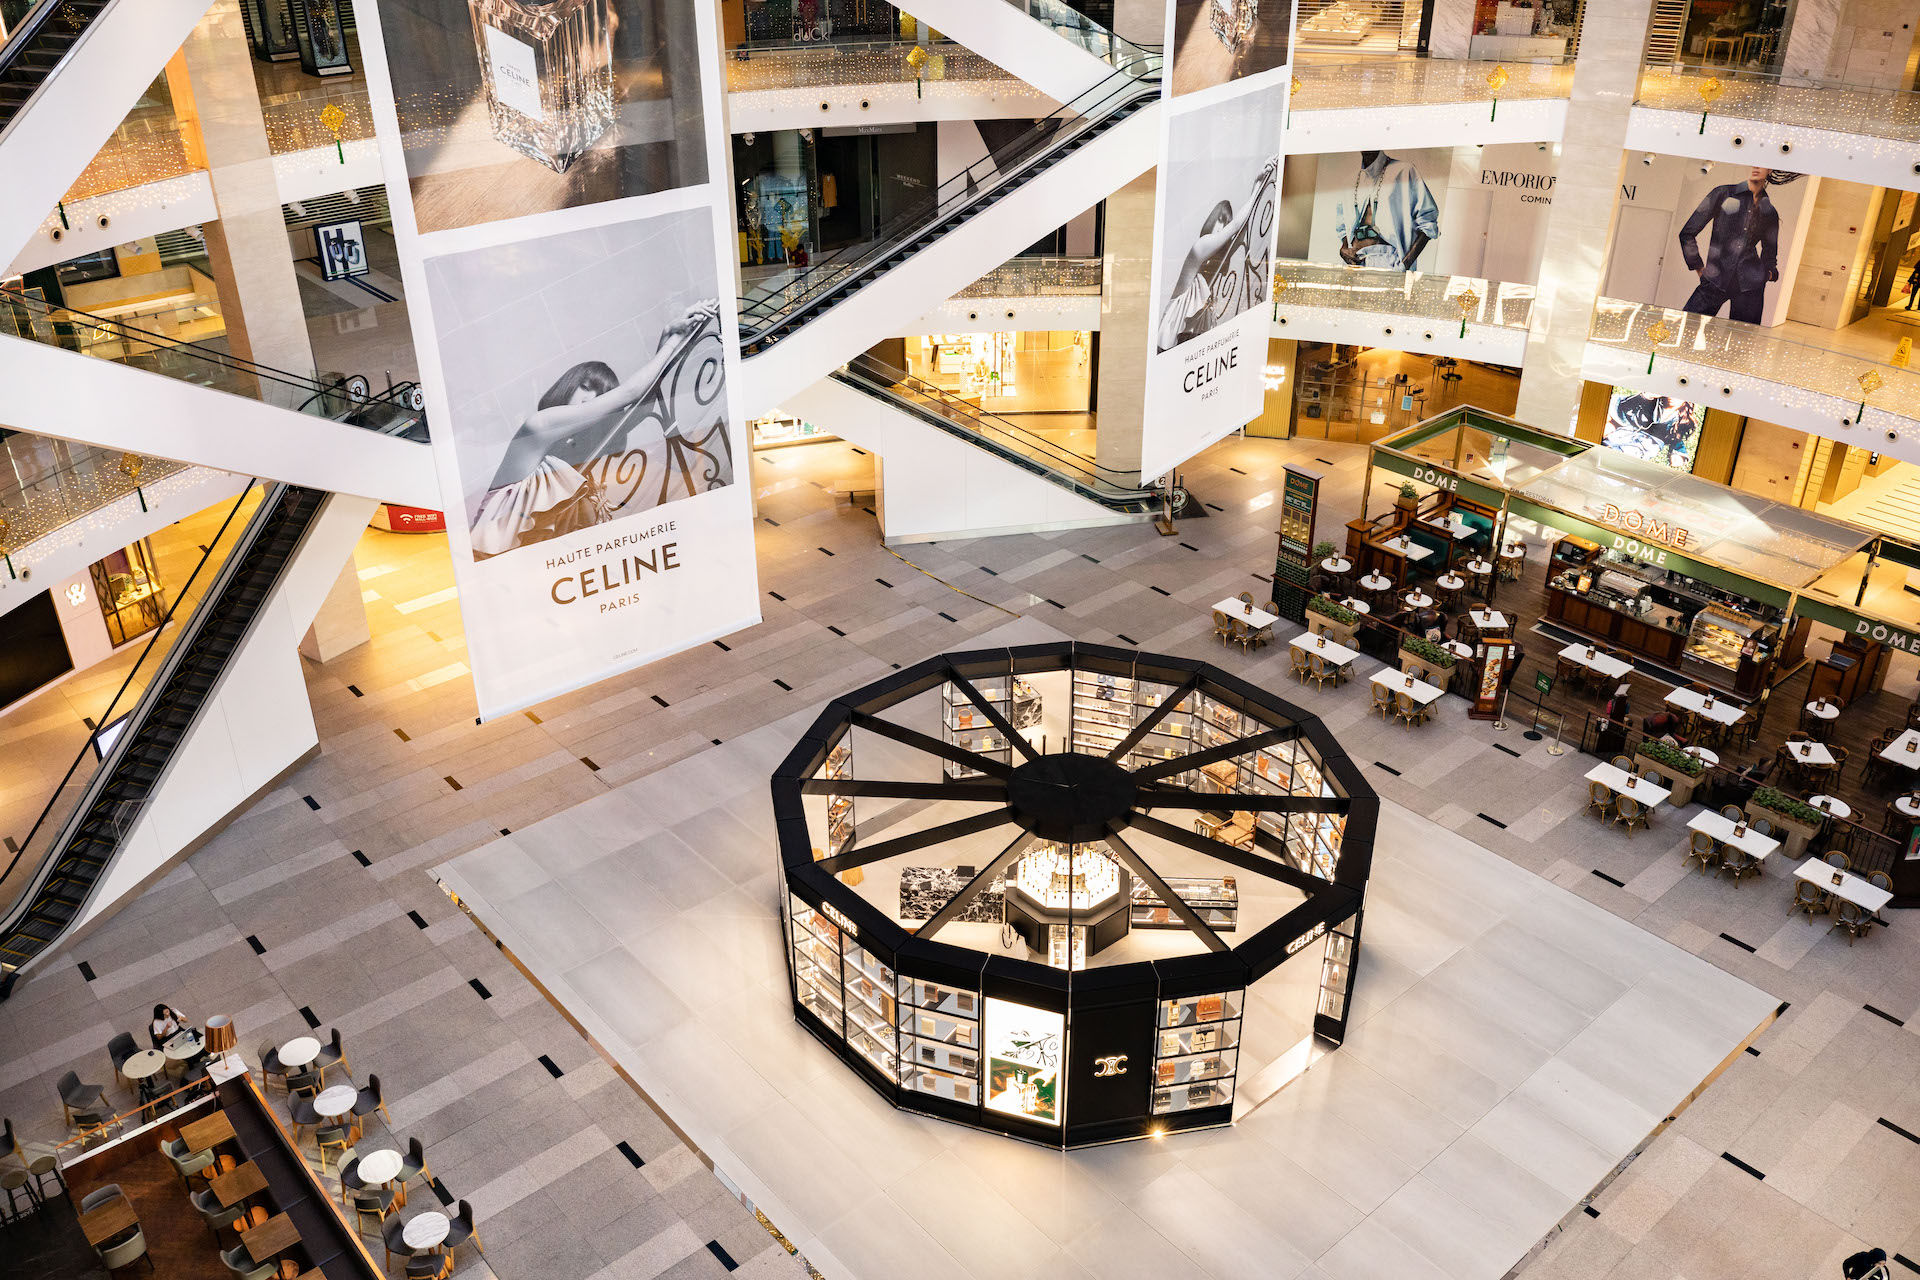 Check out the first-of-its-kind CELINE Maison Pop-up in Pavilion KL